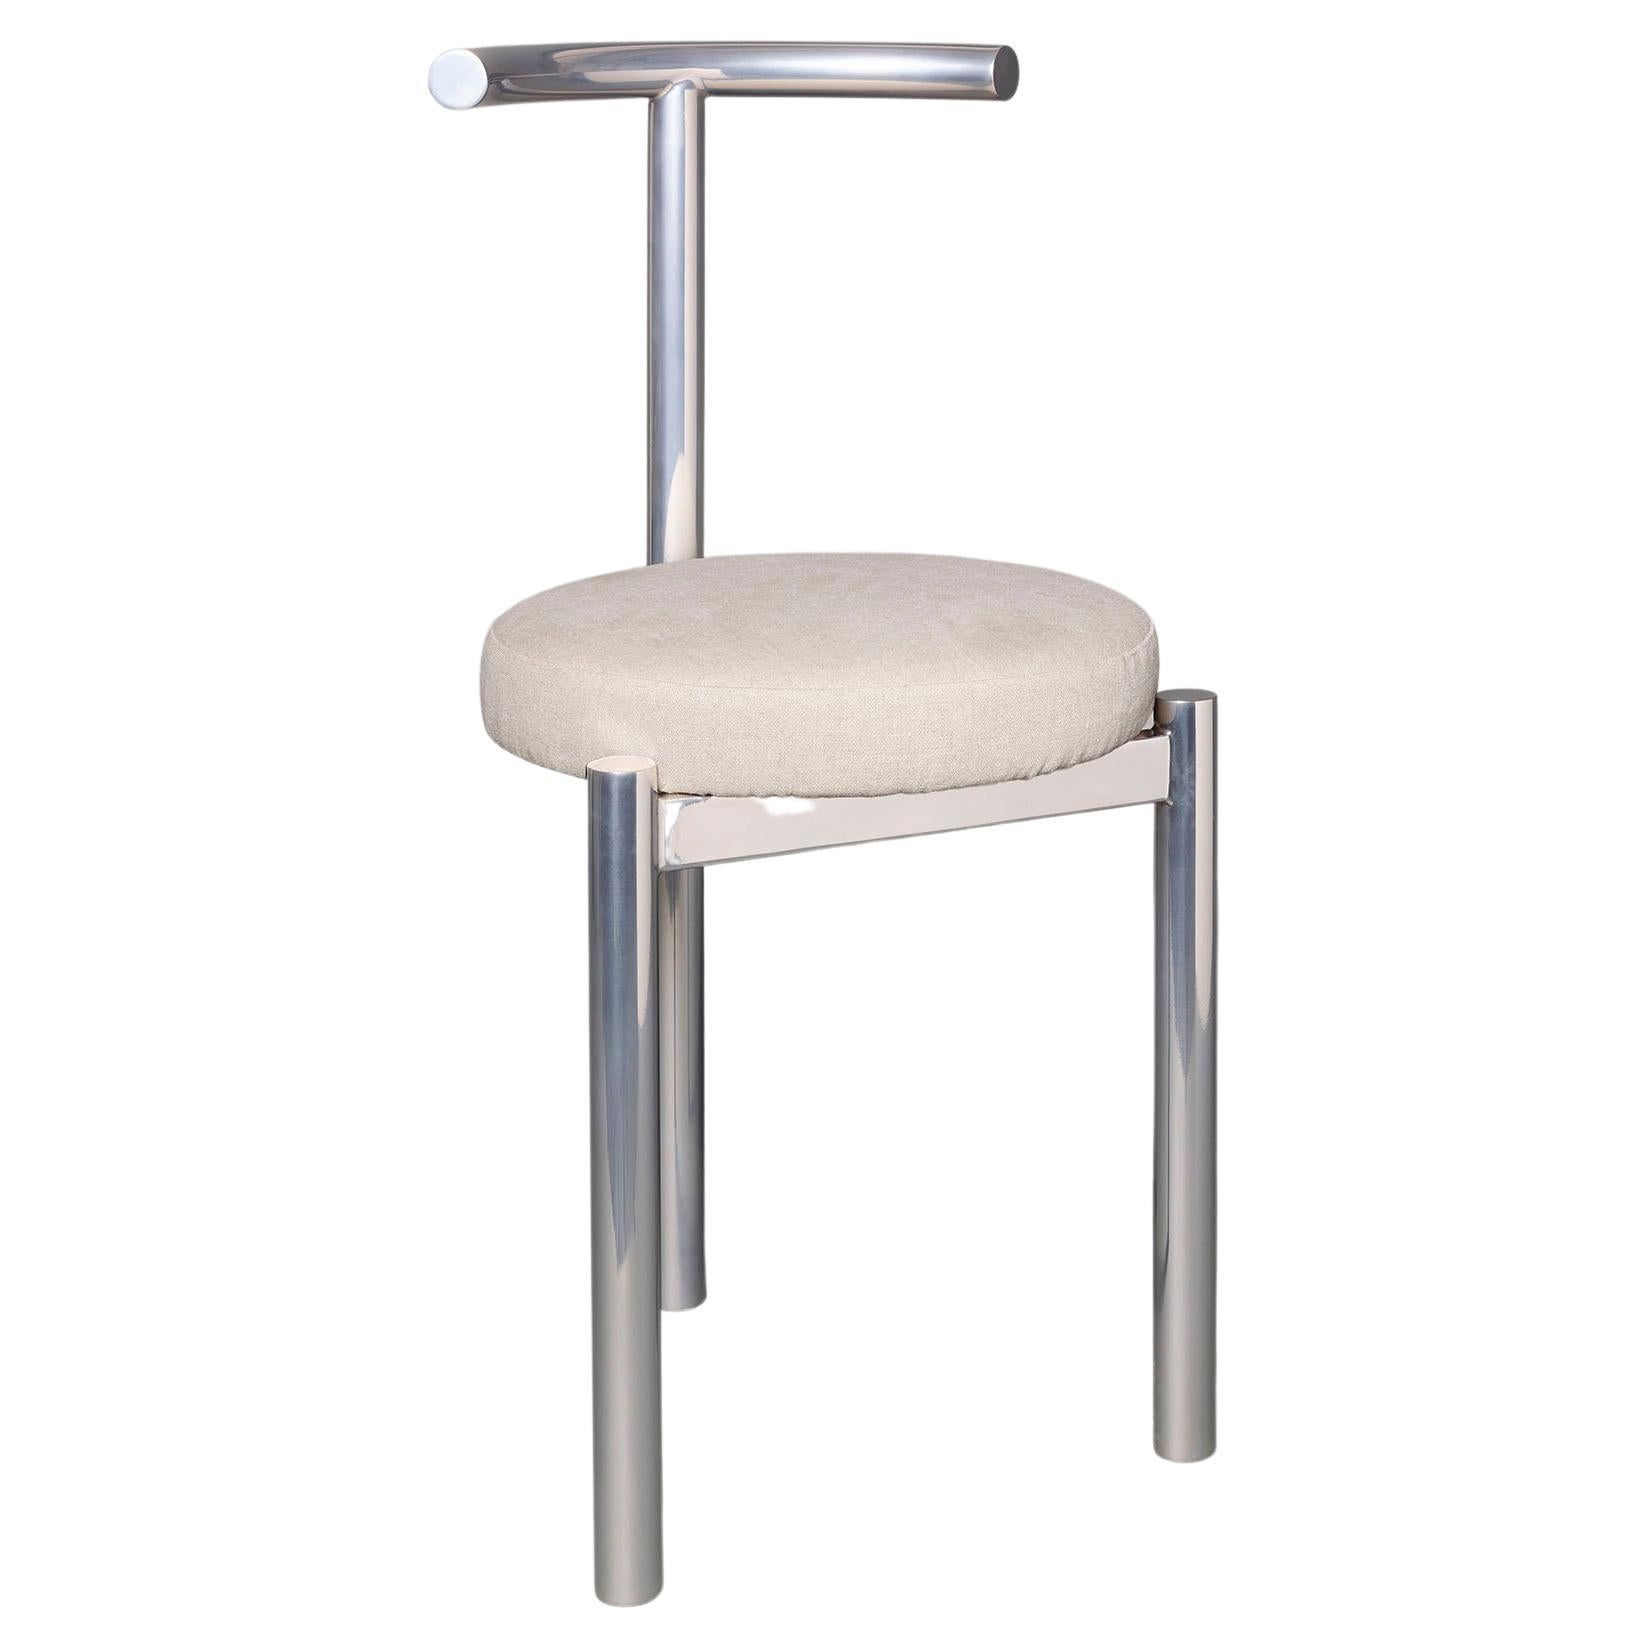 'M Series' Tubular Polished Stainless Steel Chair, Soft Fabric Seat